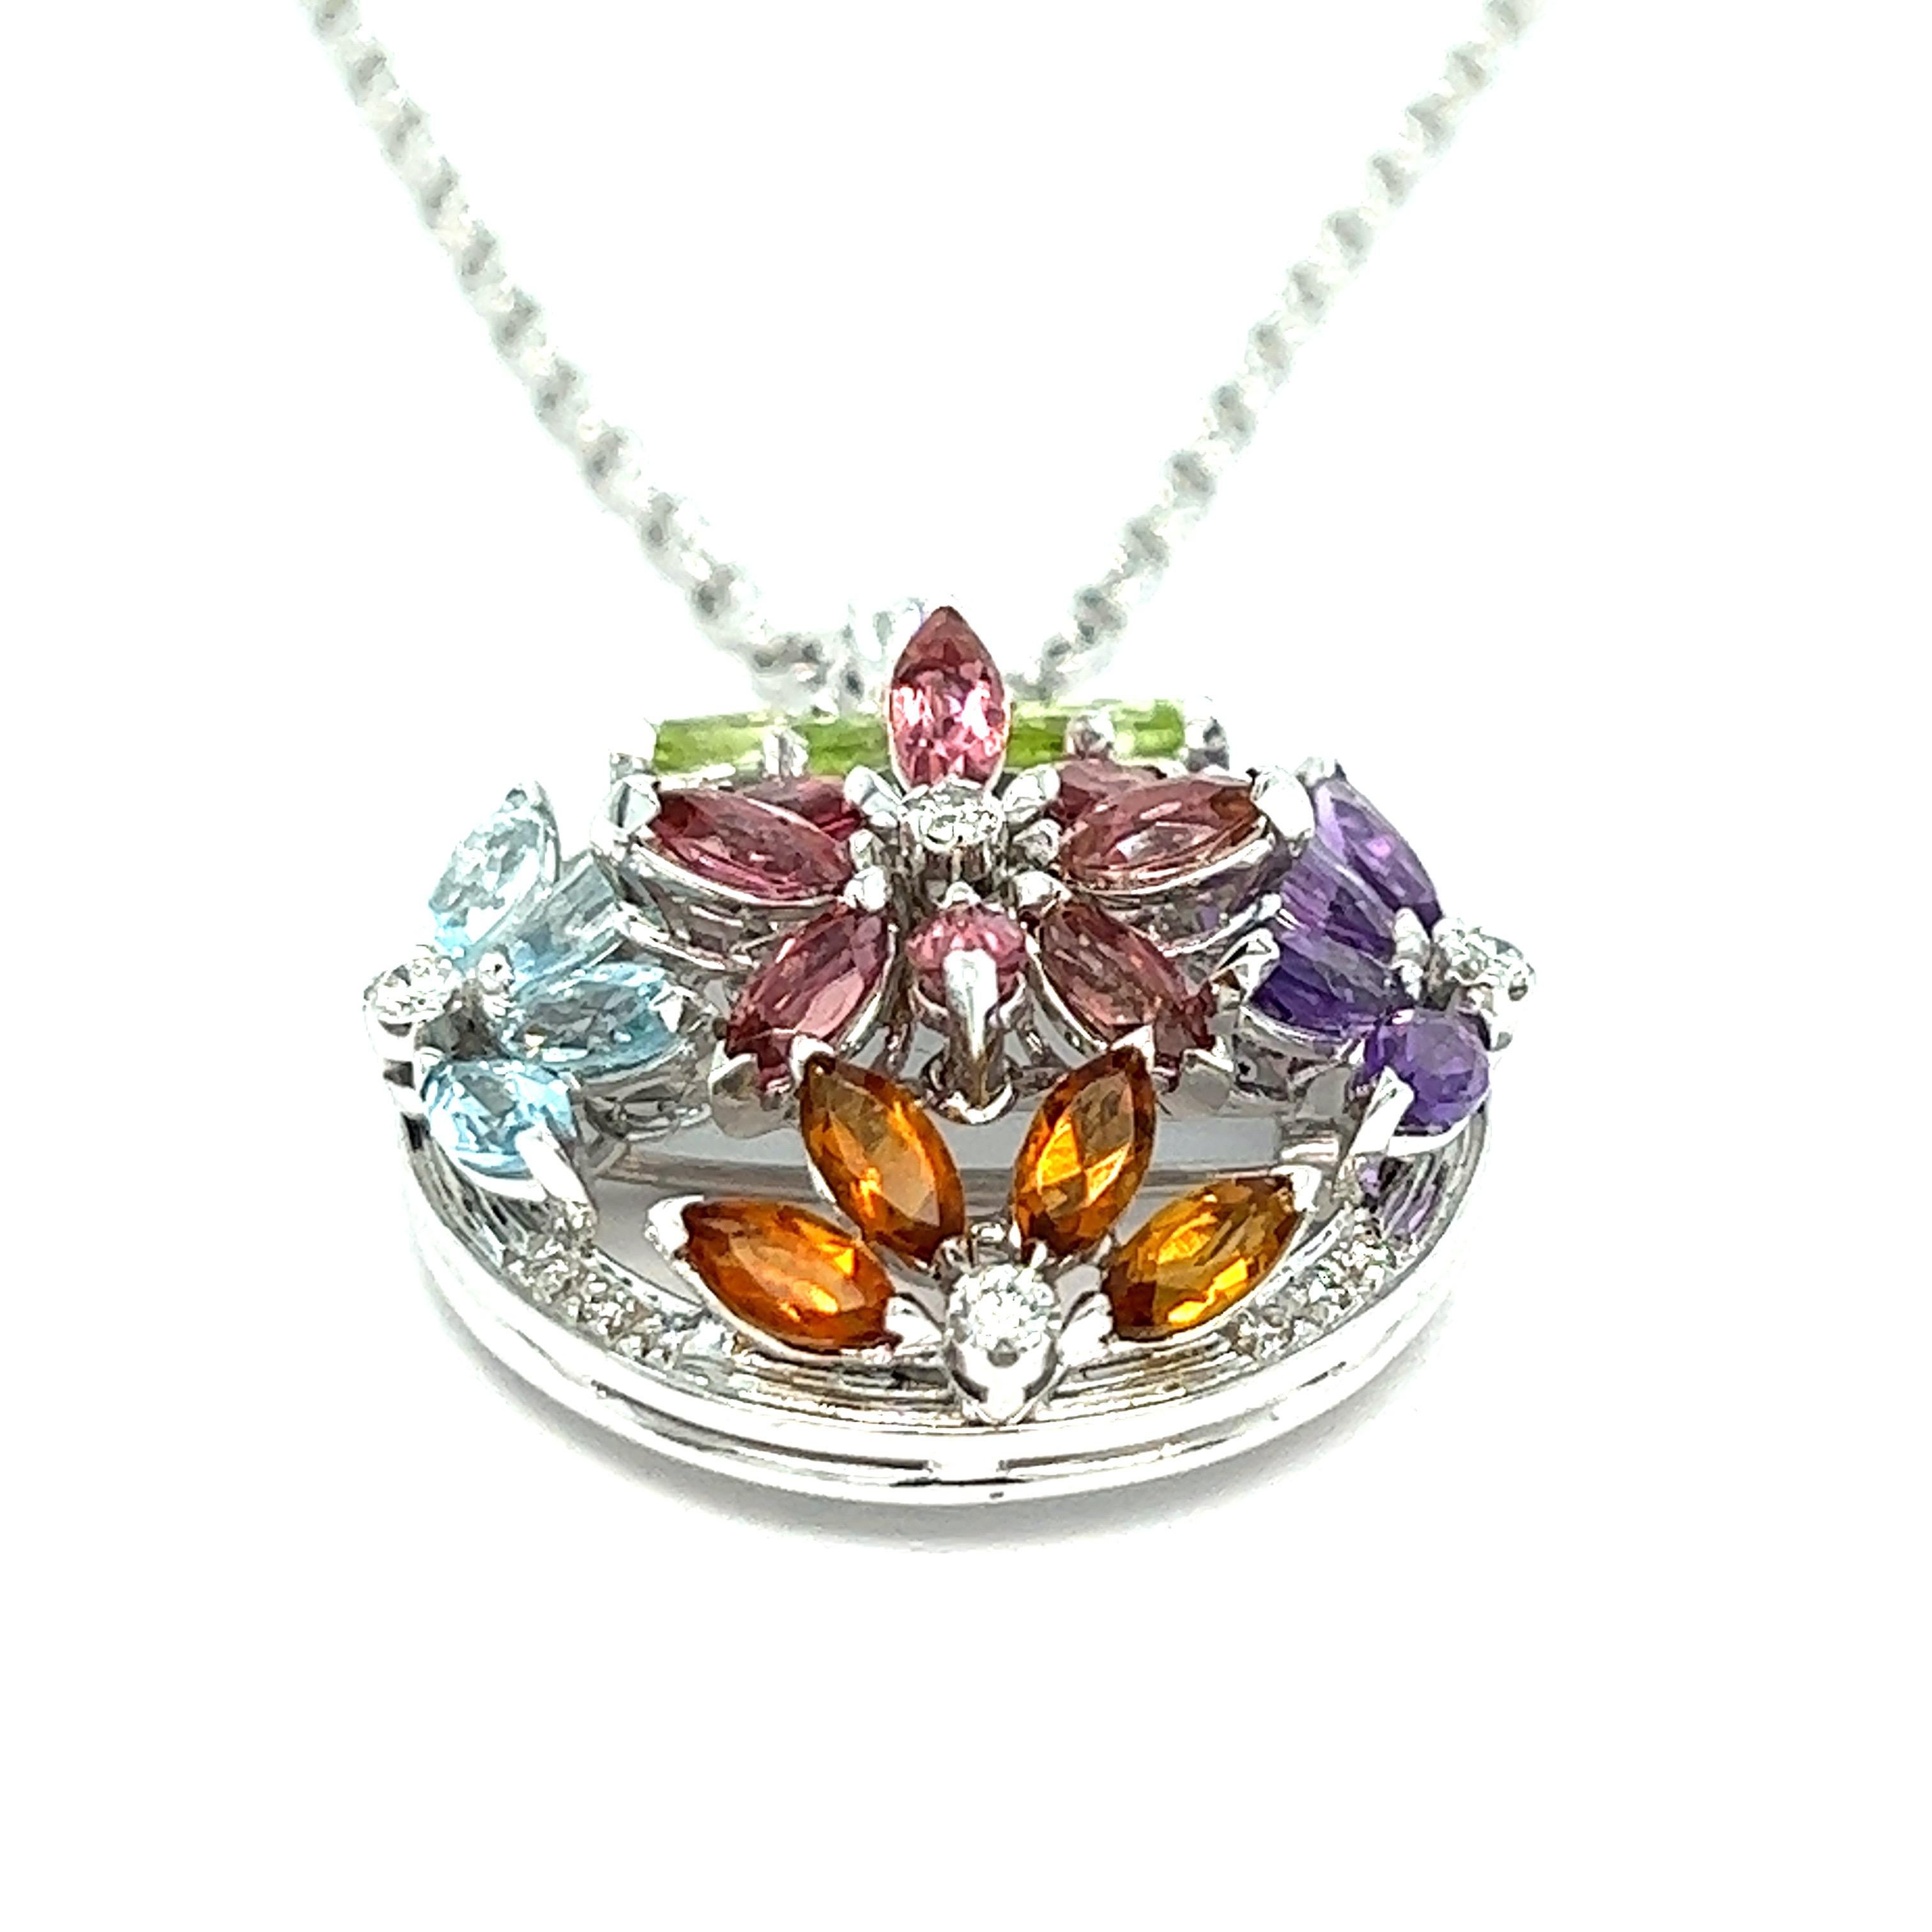 Multi-color gemstones pendant necklace, made in Italy

Marquise-shaped gemstones of aquamarine, citrine, amethyst, peridot, and tourmaline; round-cut diamonds; 18 karat white gold; marked 750, made in Italy

Size: pendant width 1 inch, length 1.25